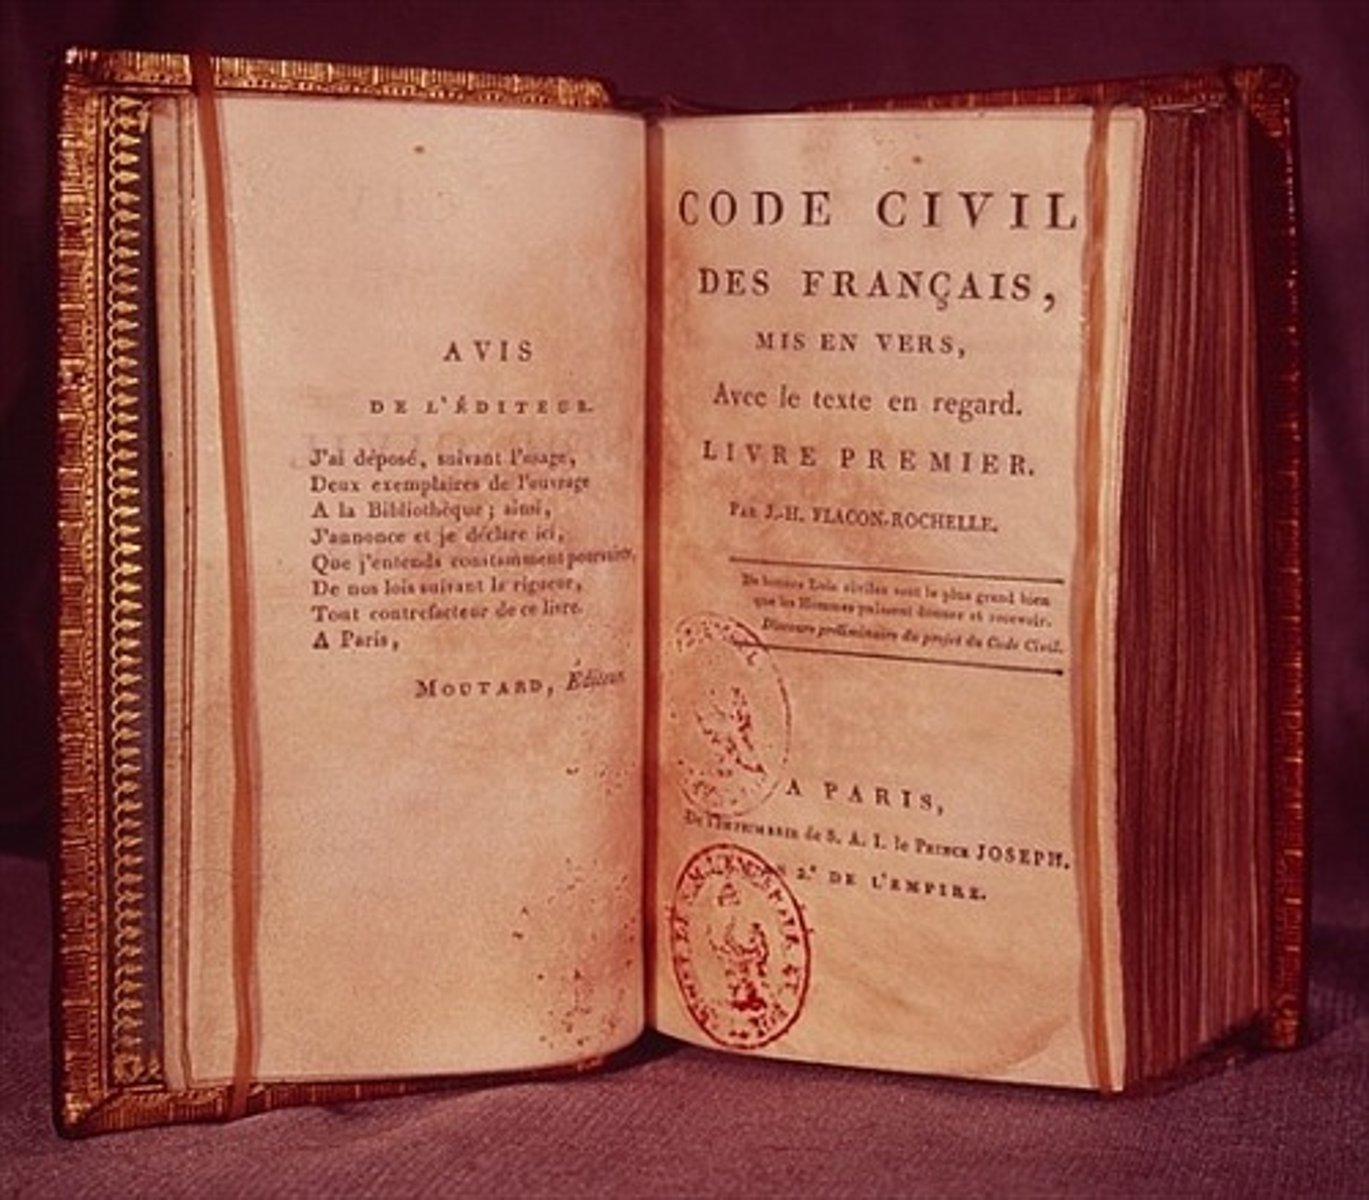 <p>also known as the Civil Code of 1804, was a comprehensive legal code introduced by Napoleon. It influenced legal systems in many countries and emphasized equality before the law and property rights.</p>